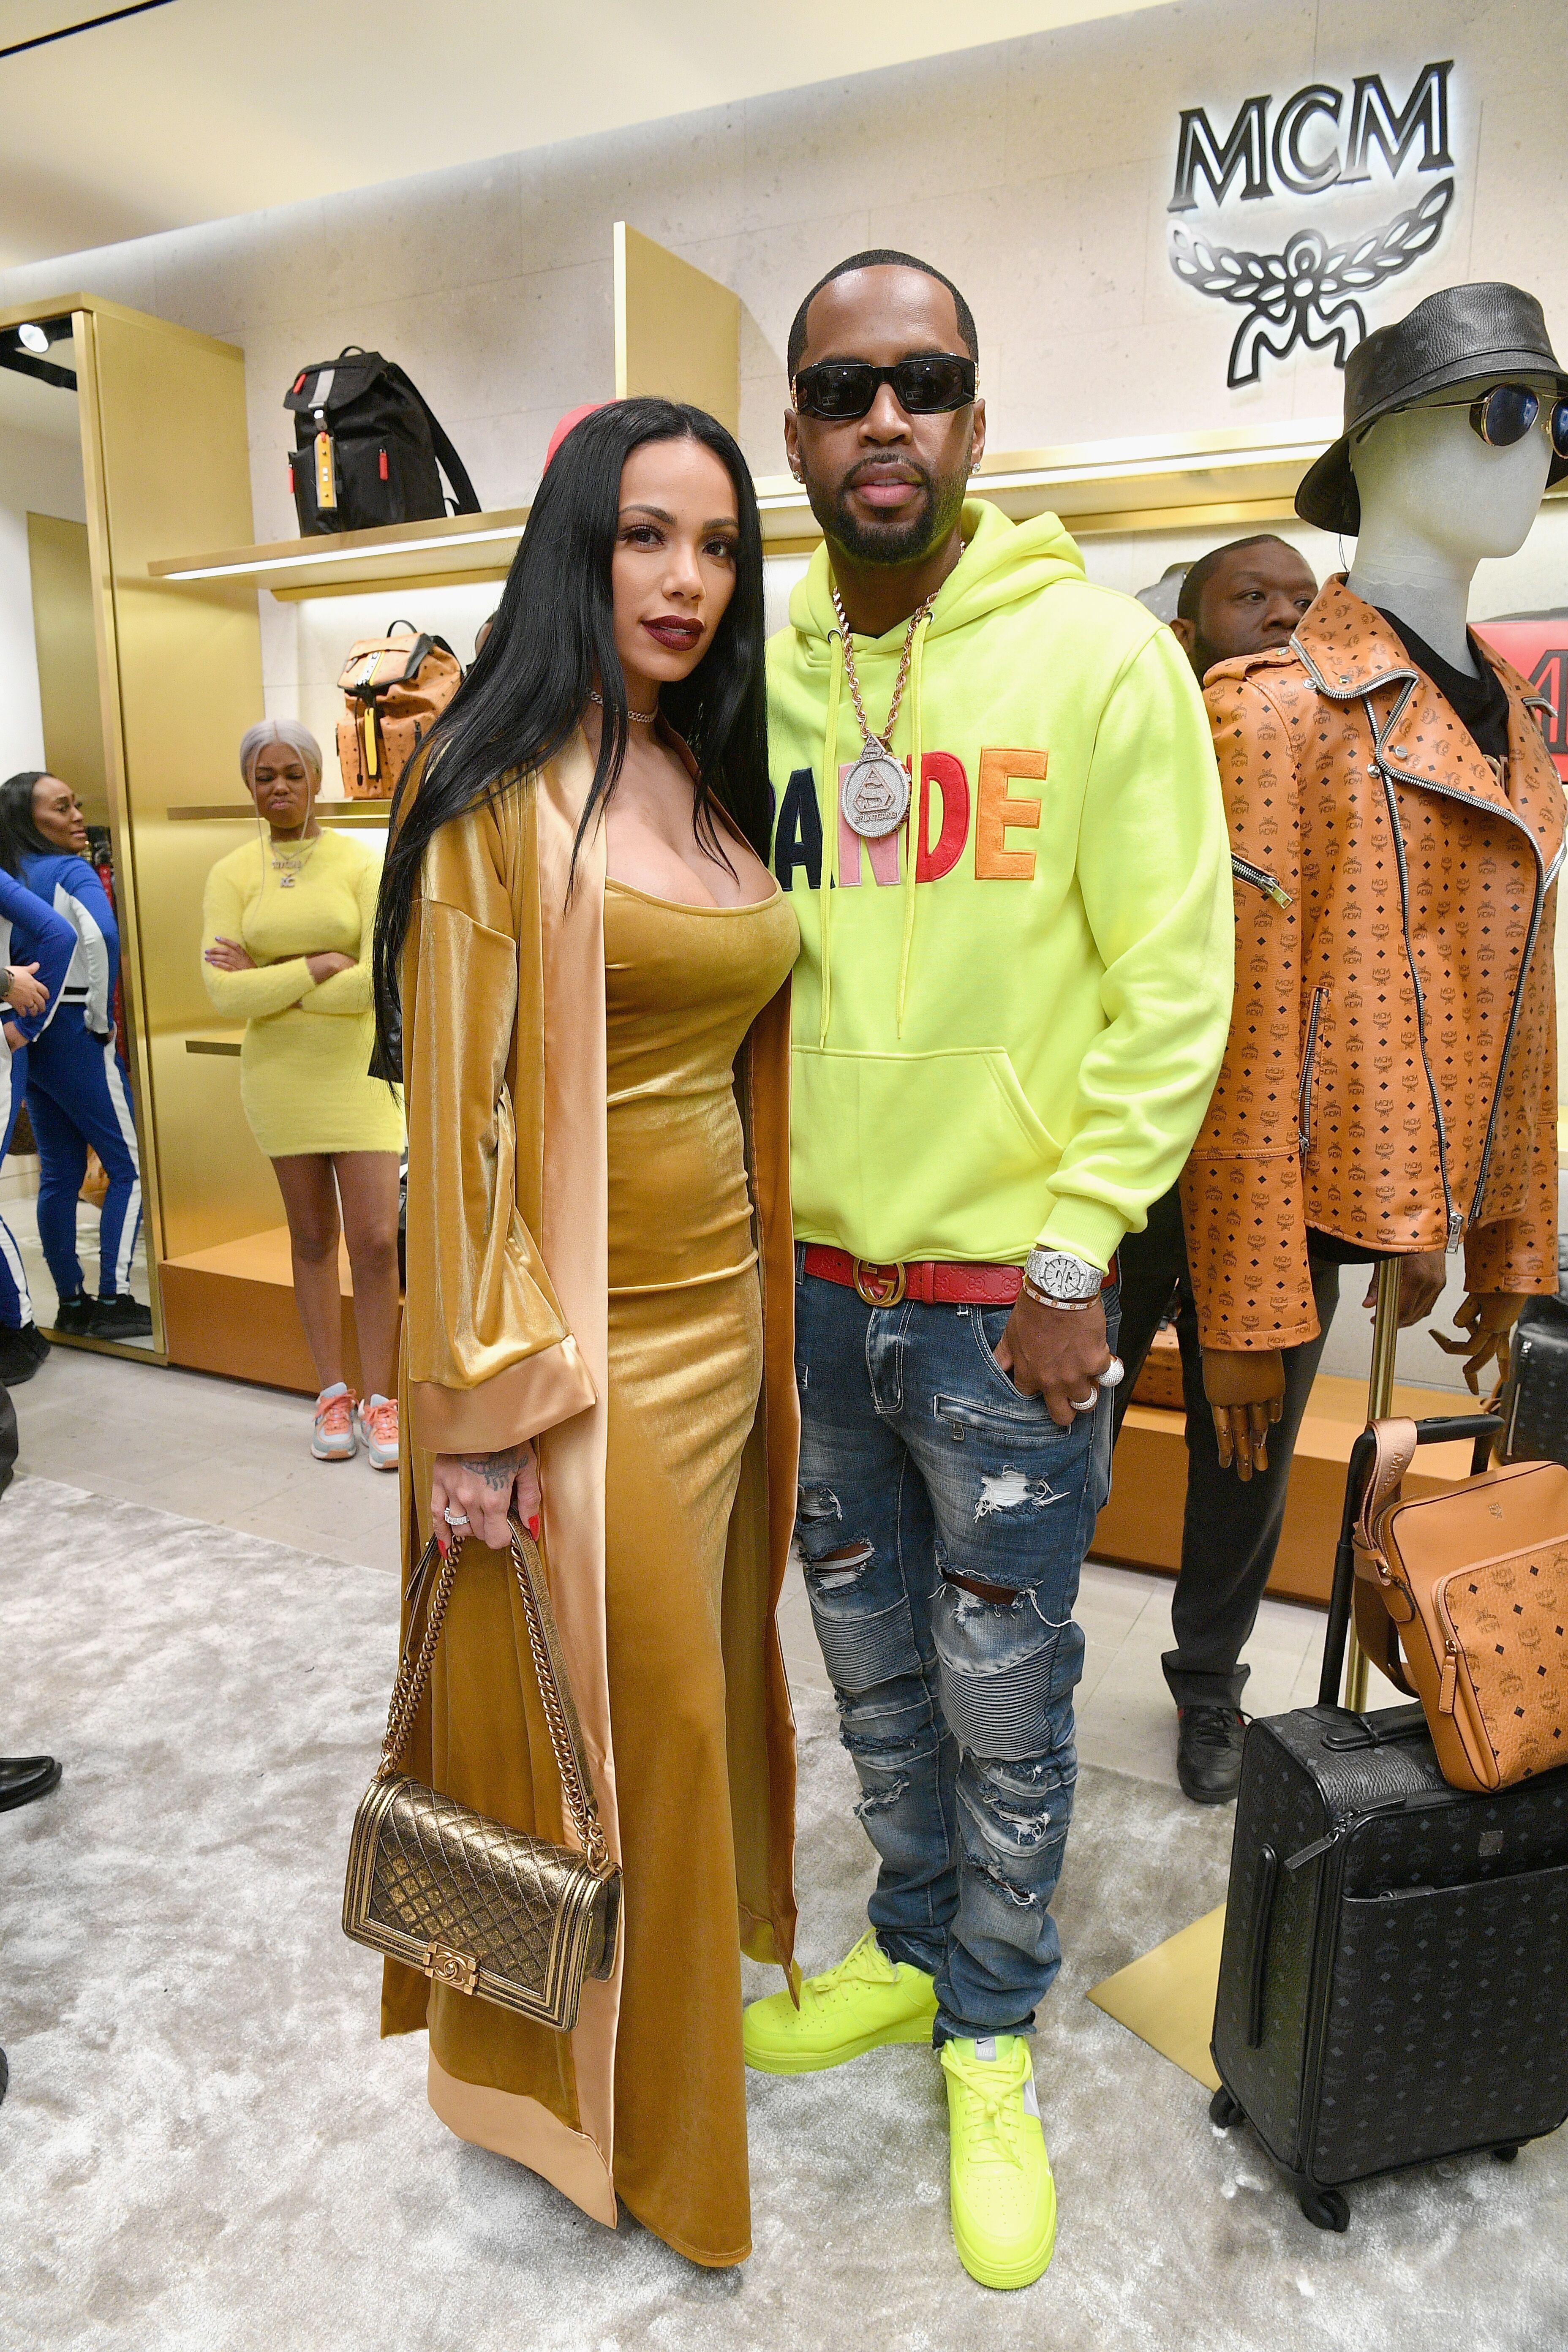 Safaree Samuels and Erica Mena at an MCM event | Source: Getty Images/GlobalImagesUkraine